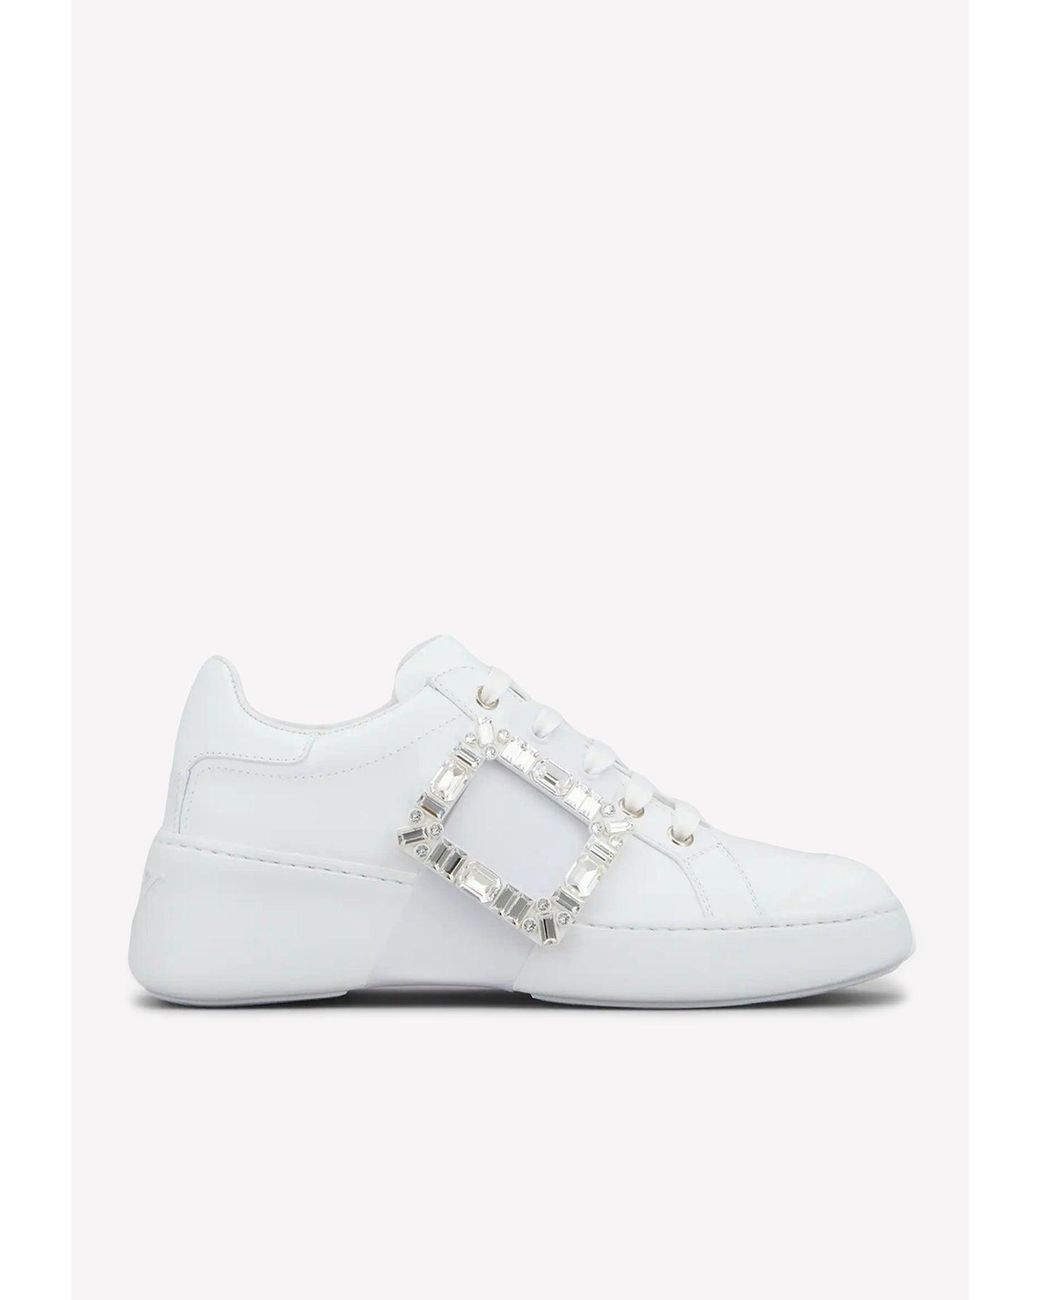 Roger Vivier Viv' Skate Crystal Buckle Sneakers In Soft Leather in White |  Lyst